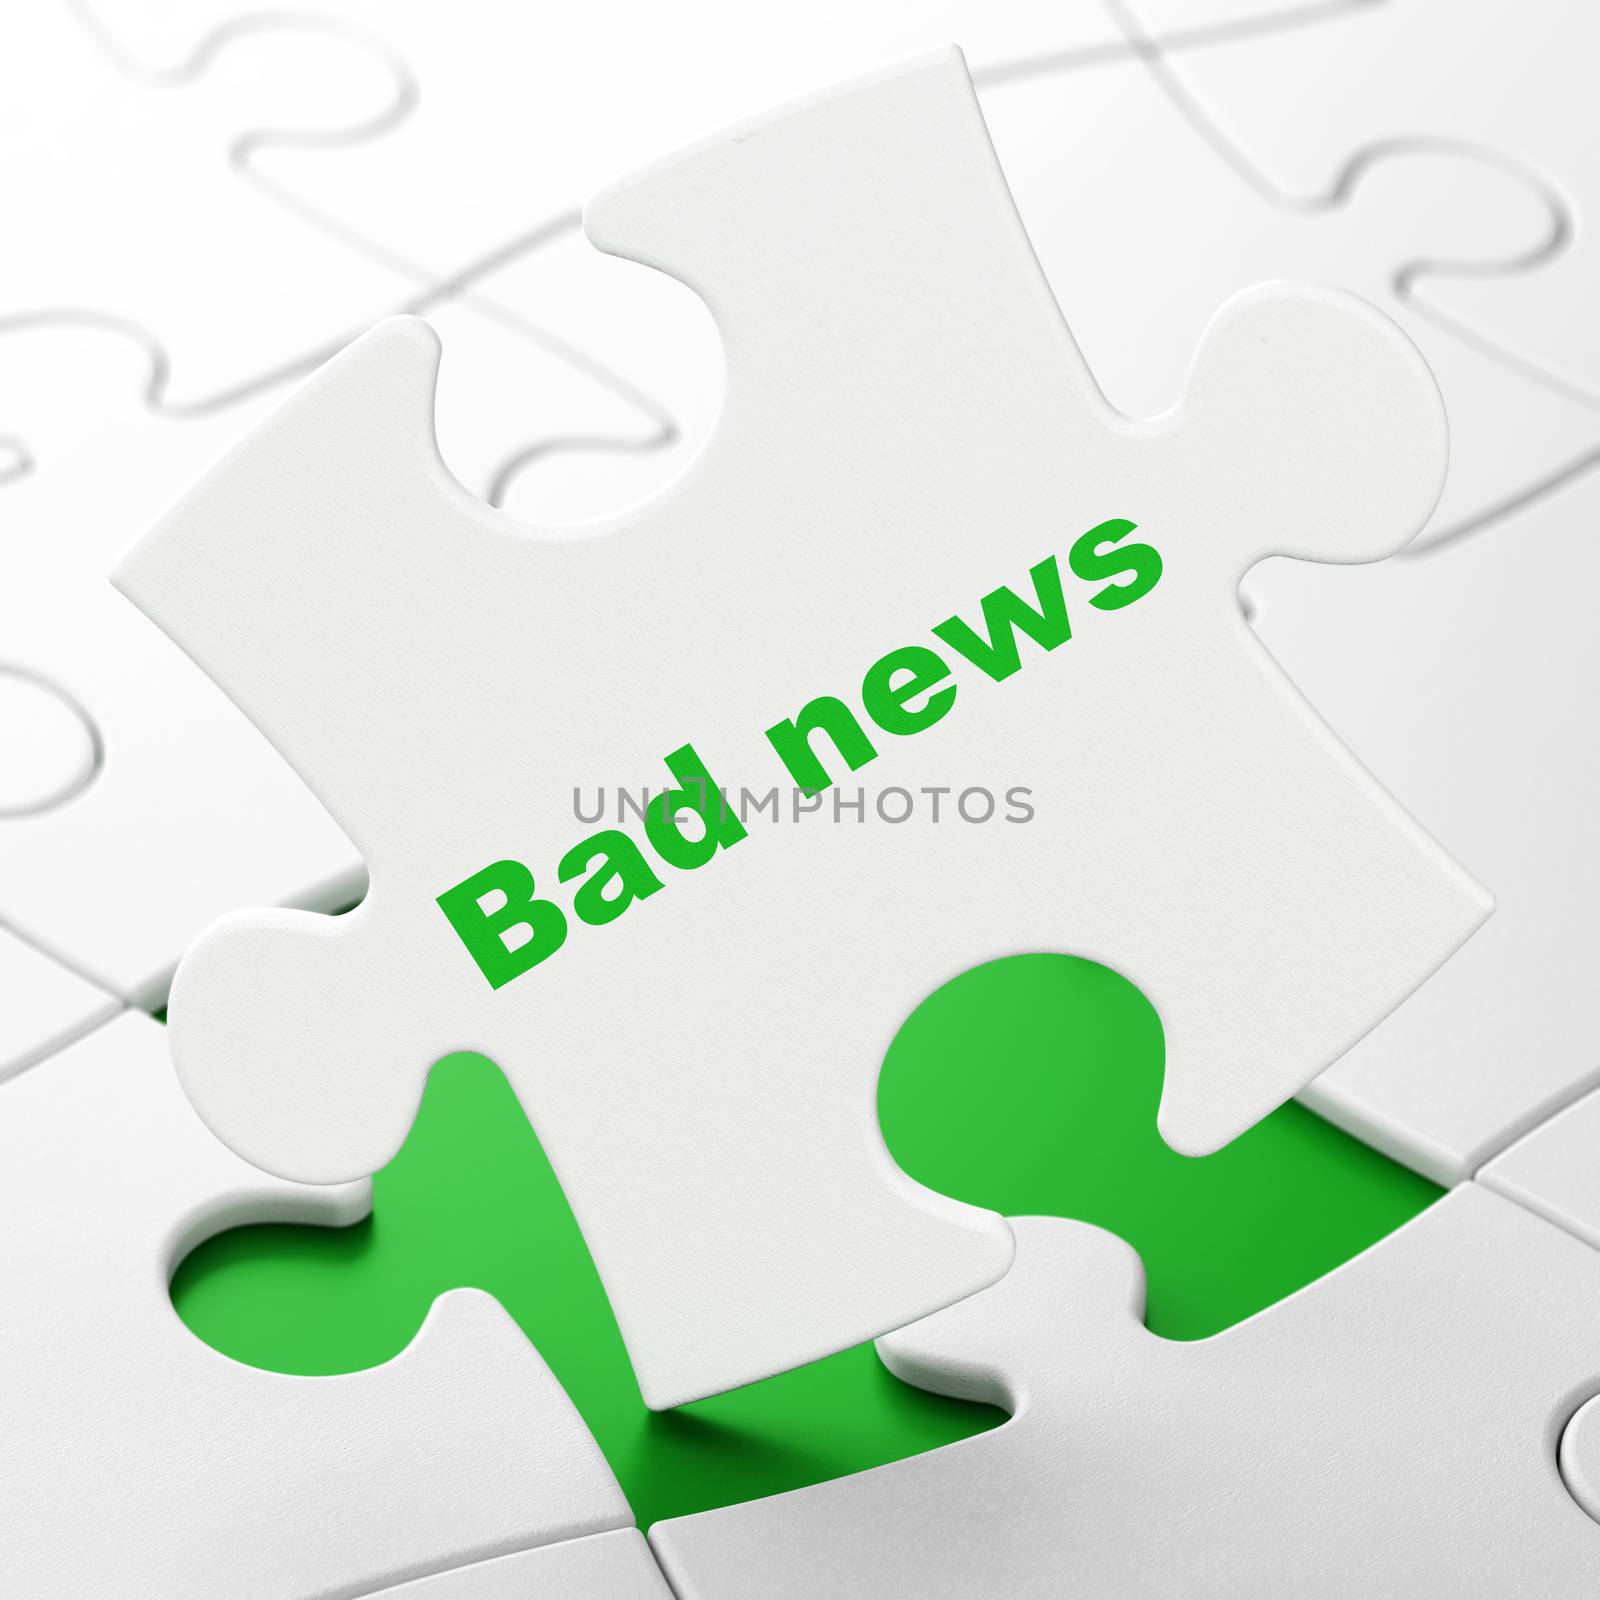 News concept: Bad News on White puzzle pieces background, 3d render